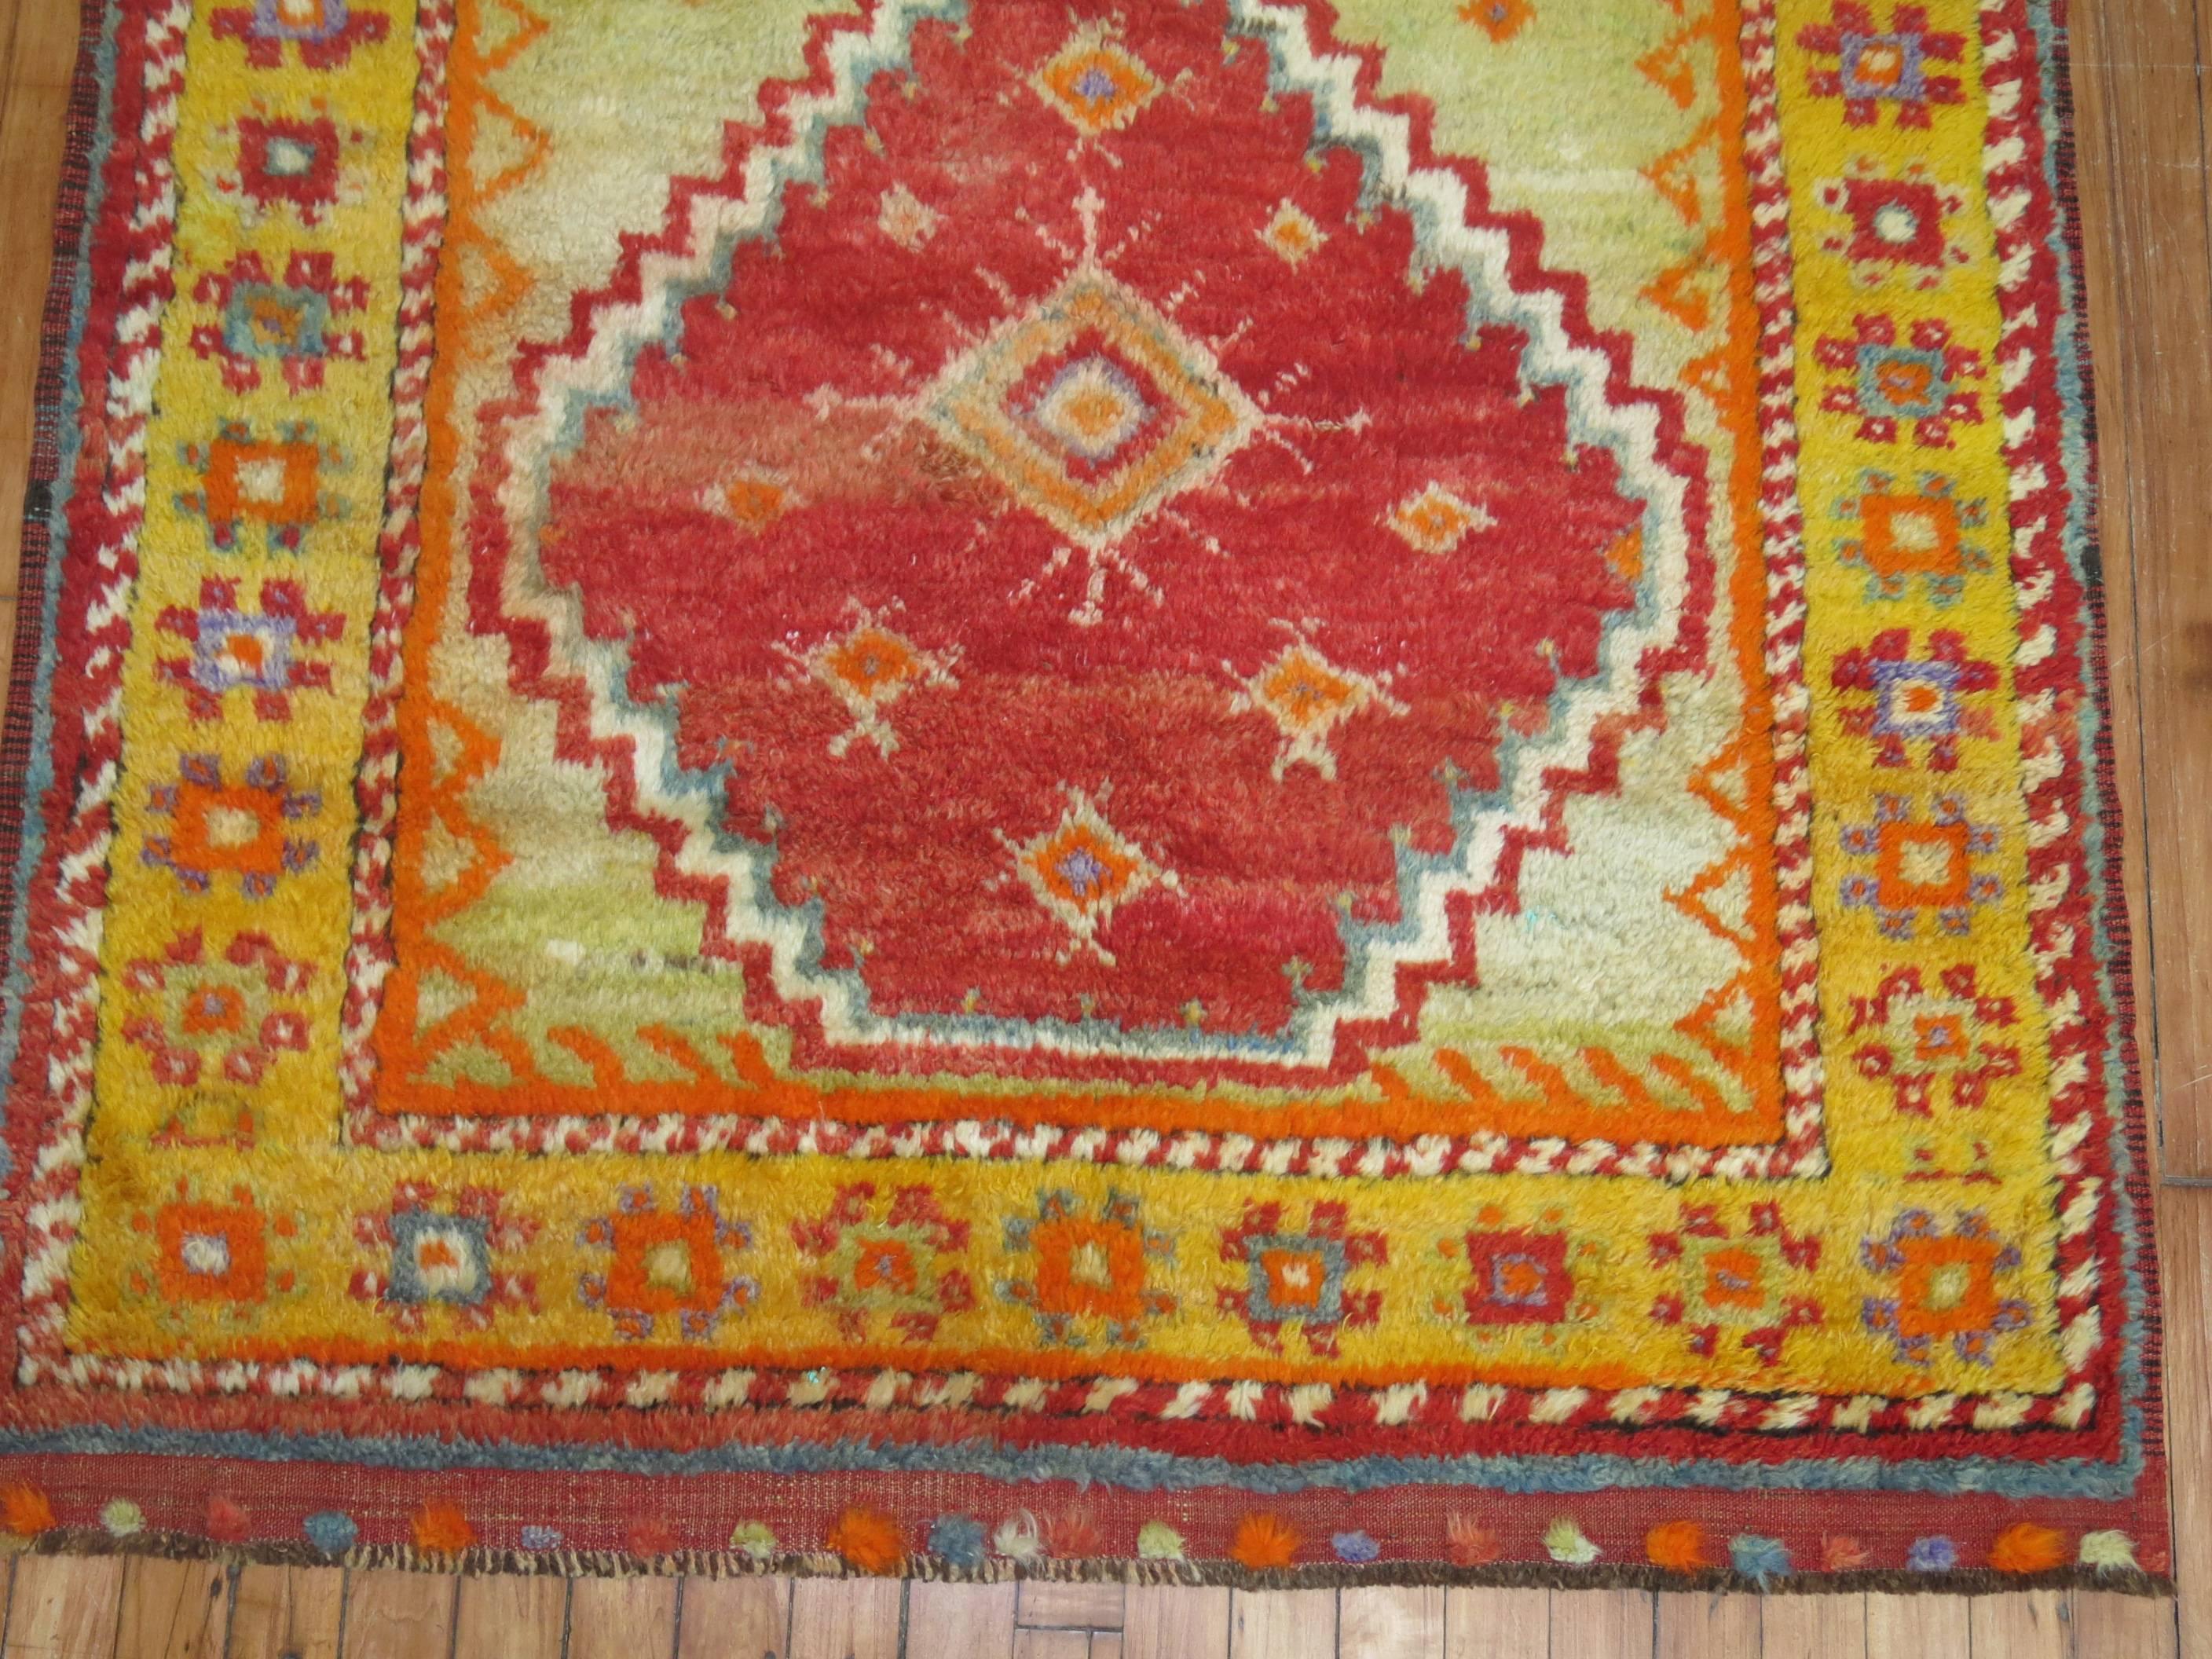 Hand-Knotted Colorful Red Orange Vintage Turkish Tulu Square Carpet For Sale